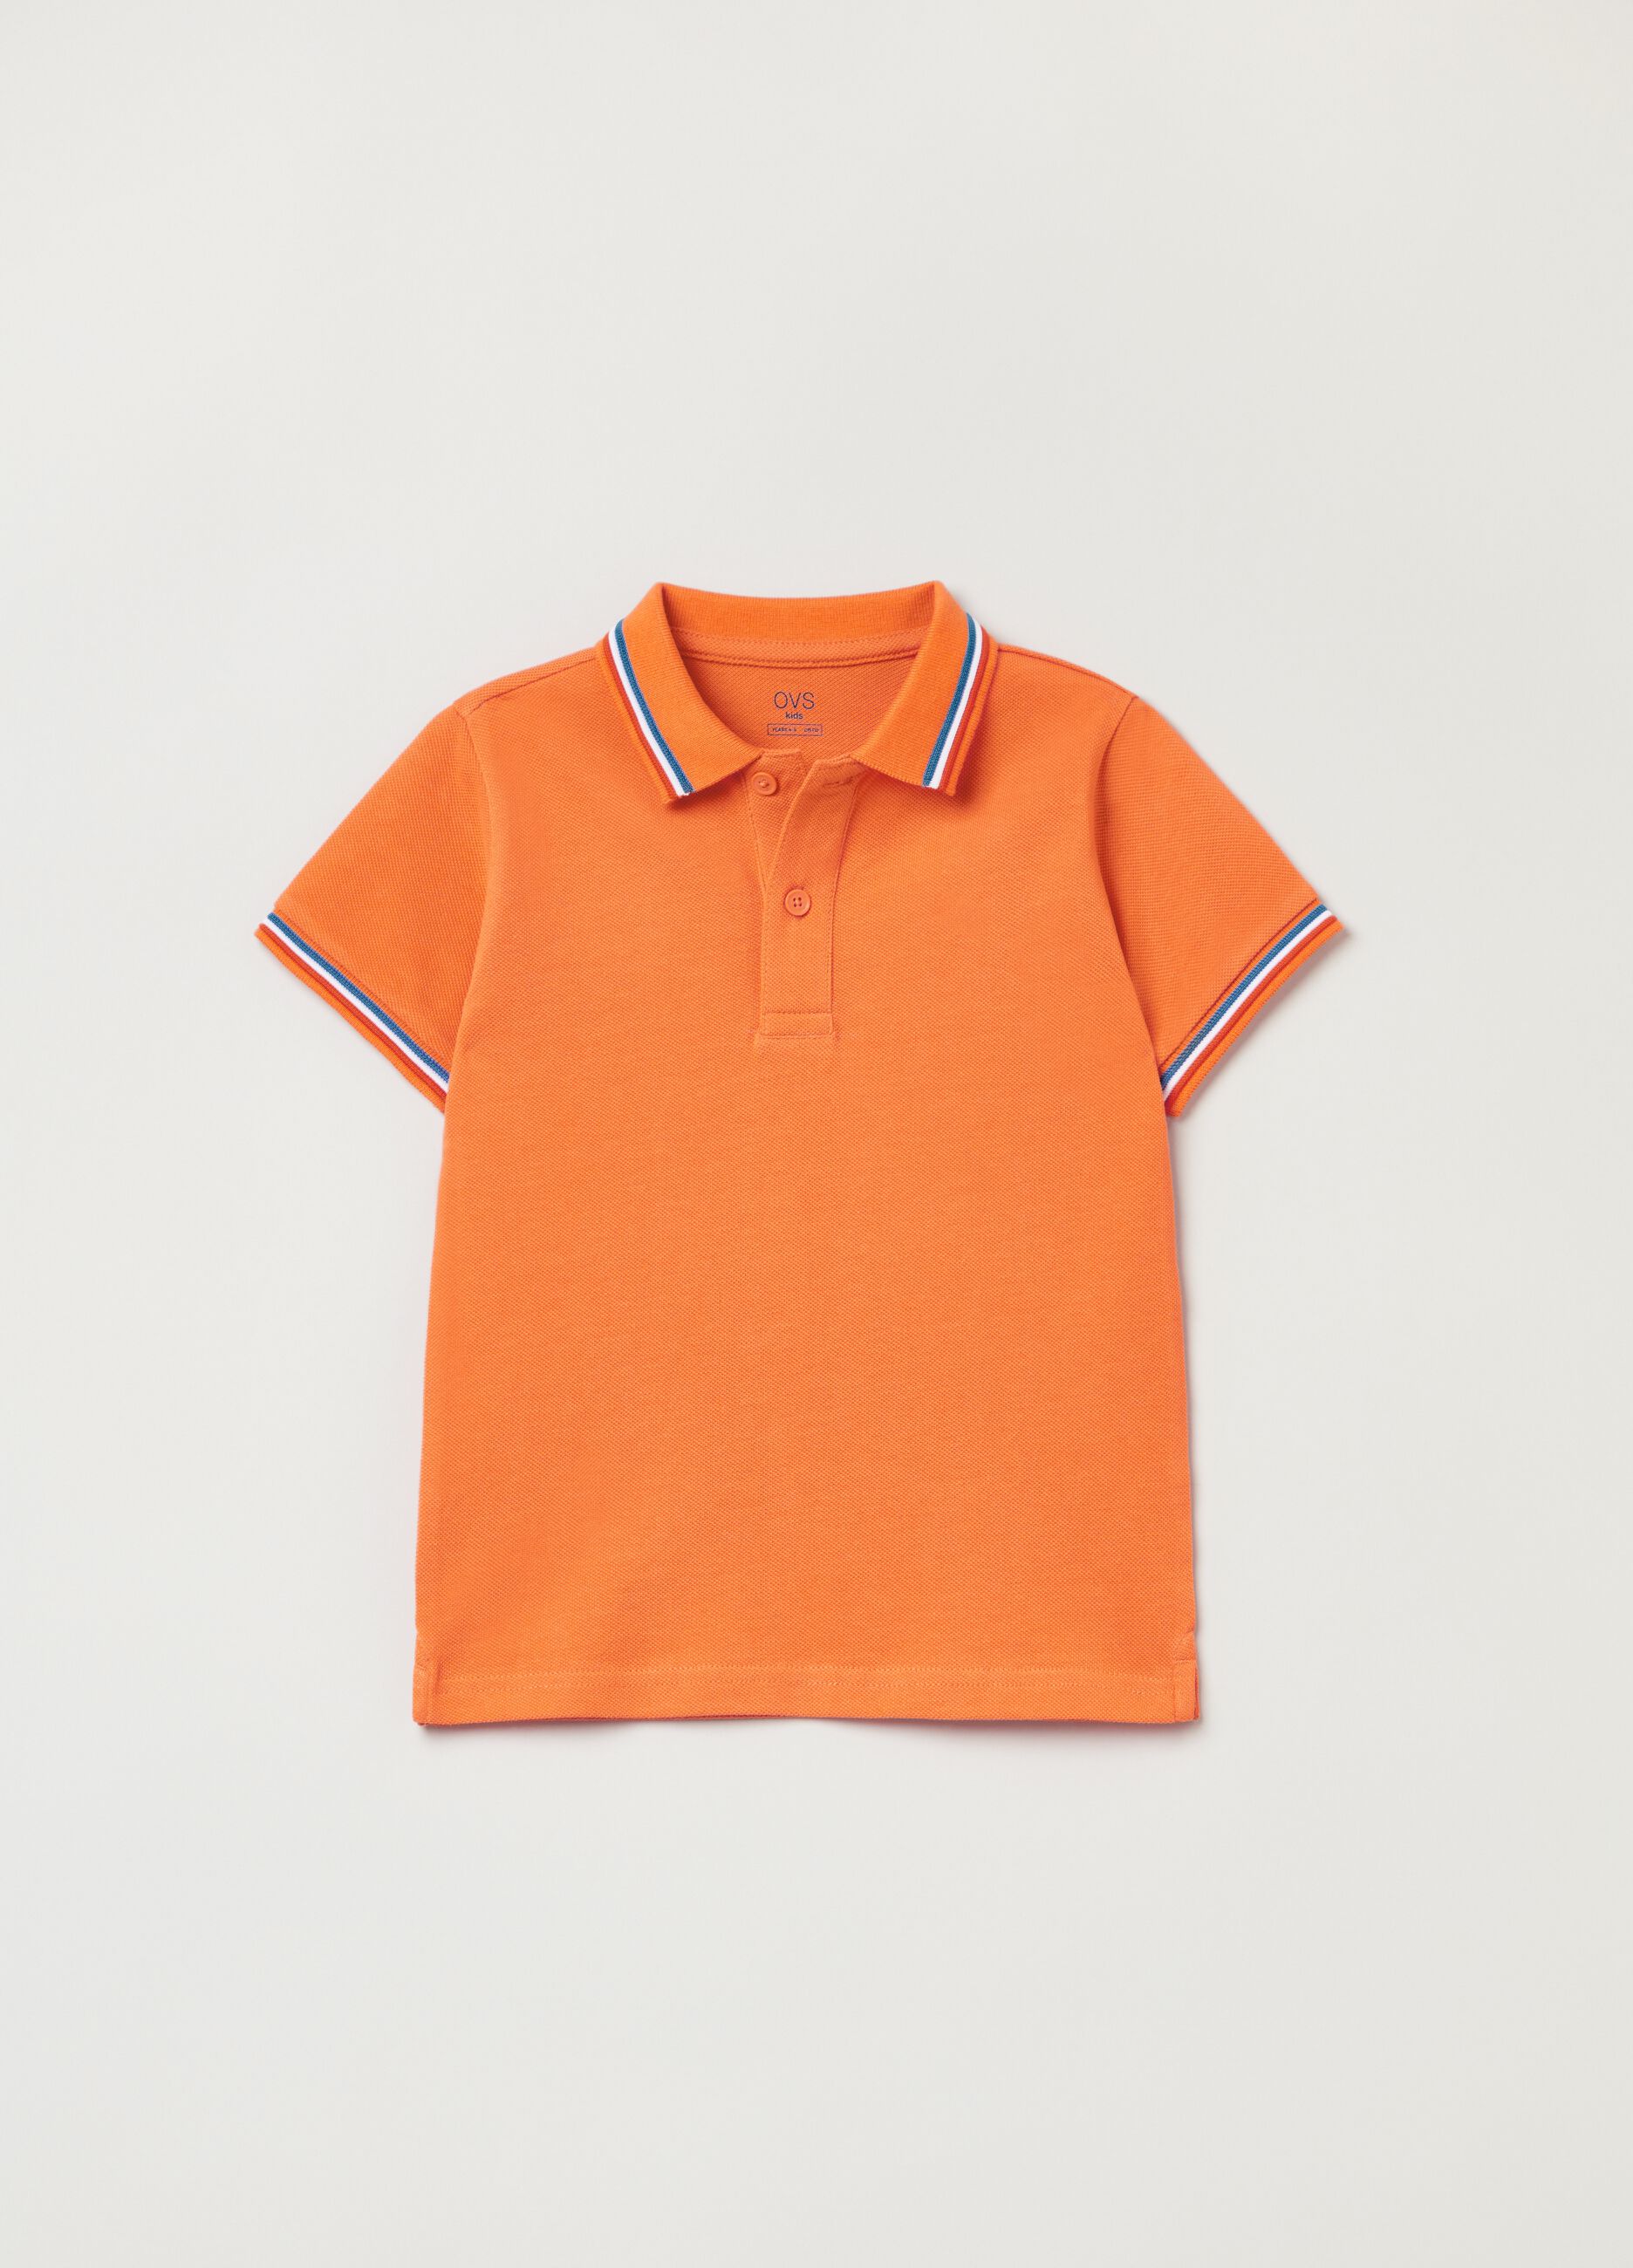 Polo shirt in cotton piquet with striped trims